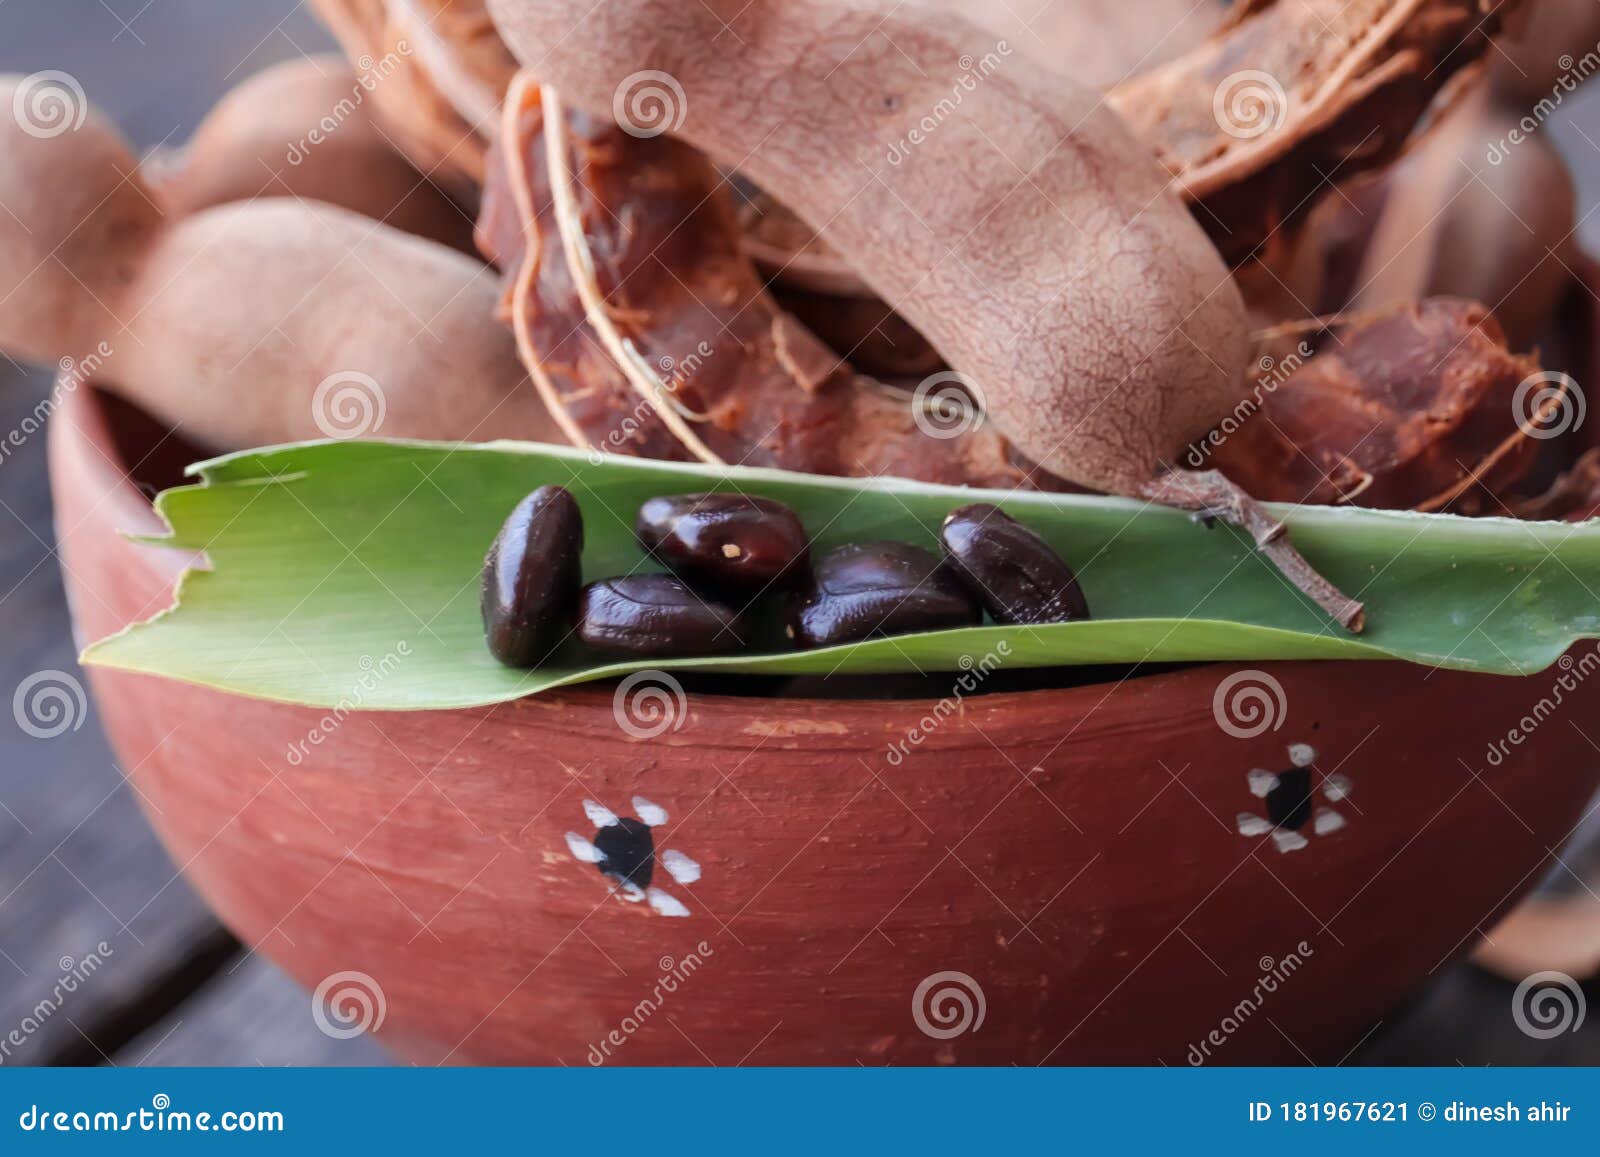 Tamarind Seed On Old Wood Table Close Up Tamarinds And Seeds Tamarind Fruits With Seeds Stock Image Image Of Bean Closeup